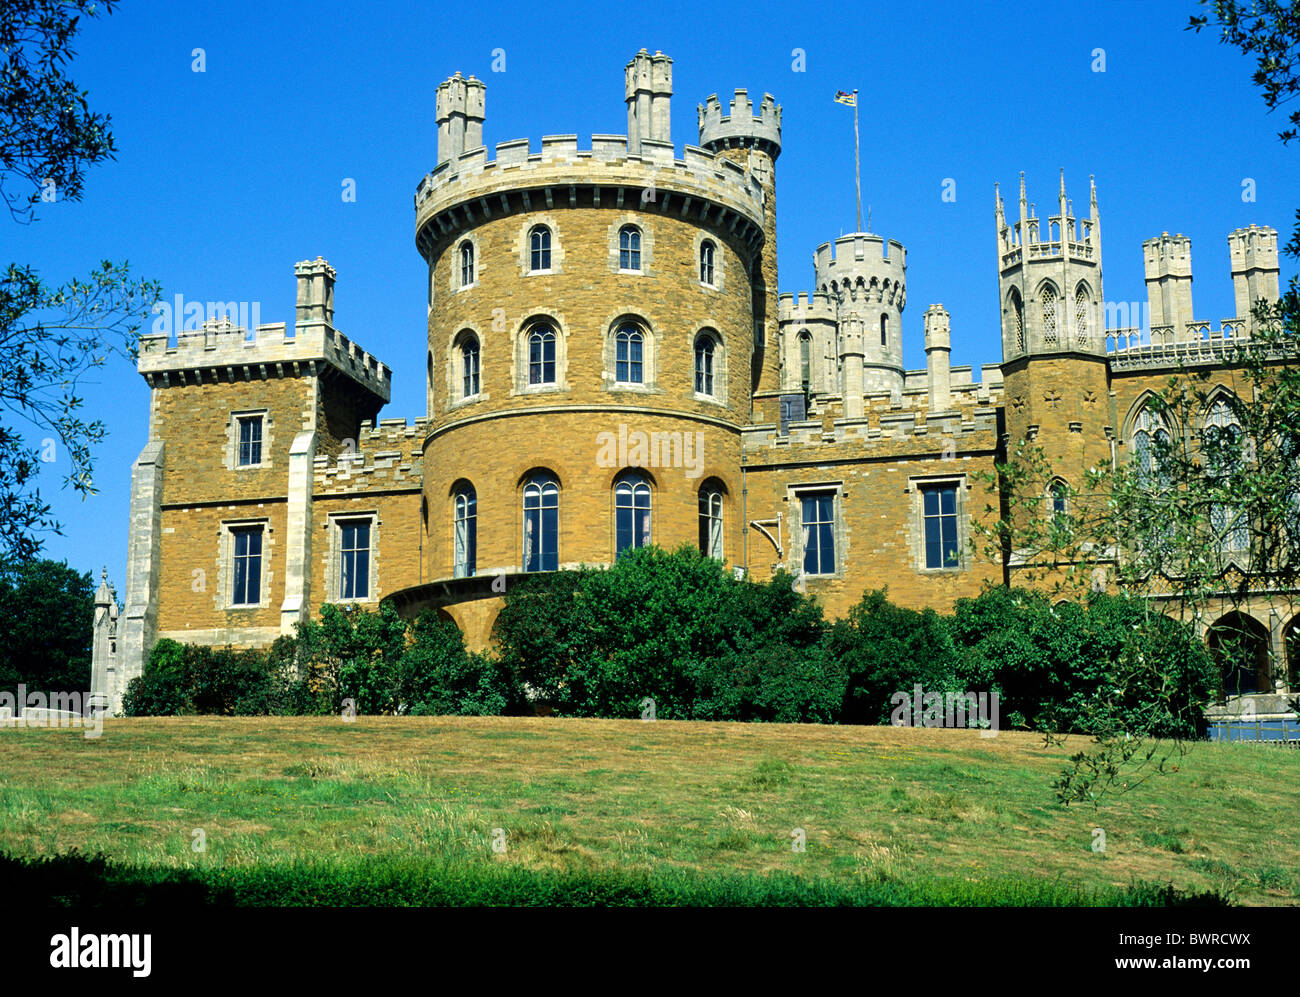 Belvoir Castle, Leicestershire England UK English castles stately home homes Stock Photo